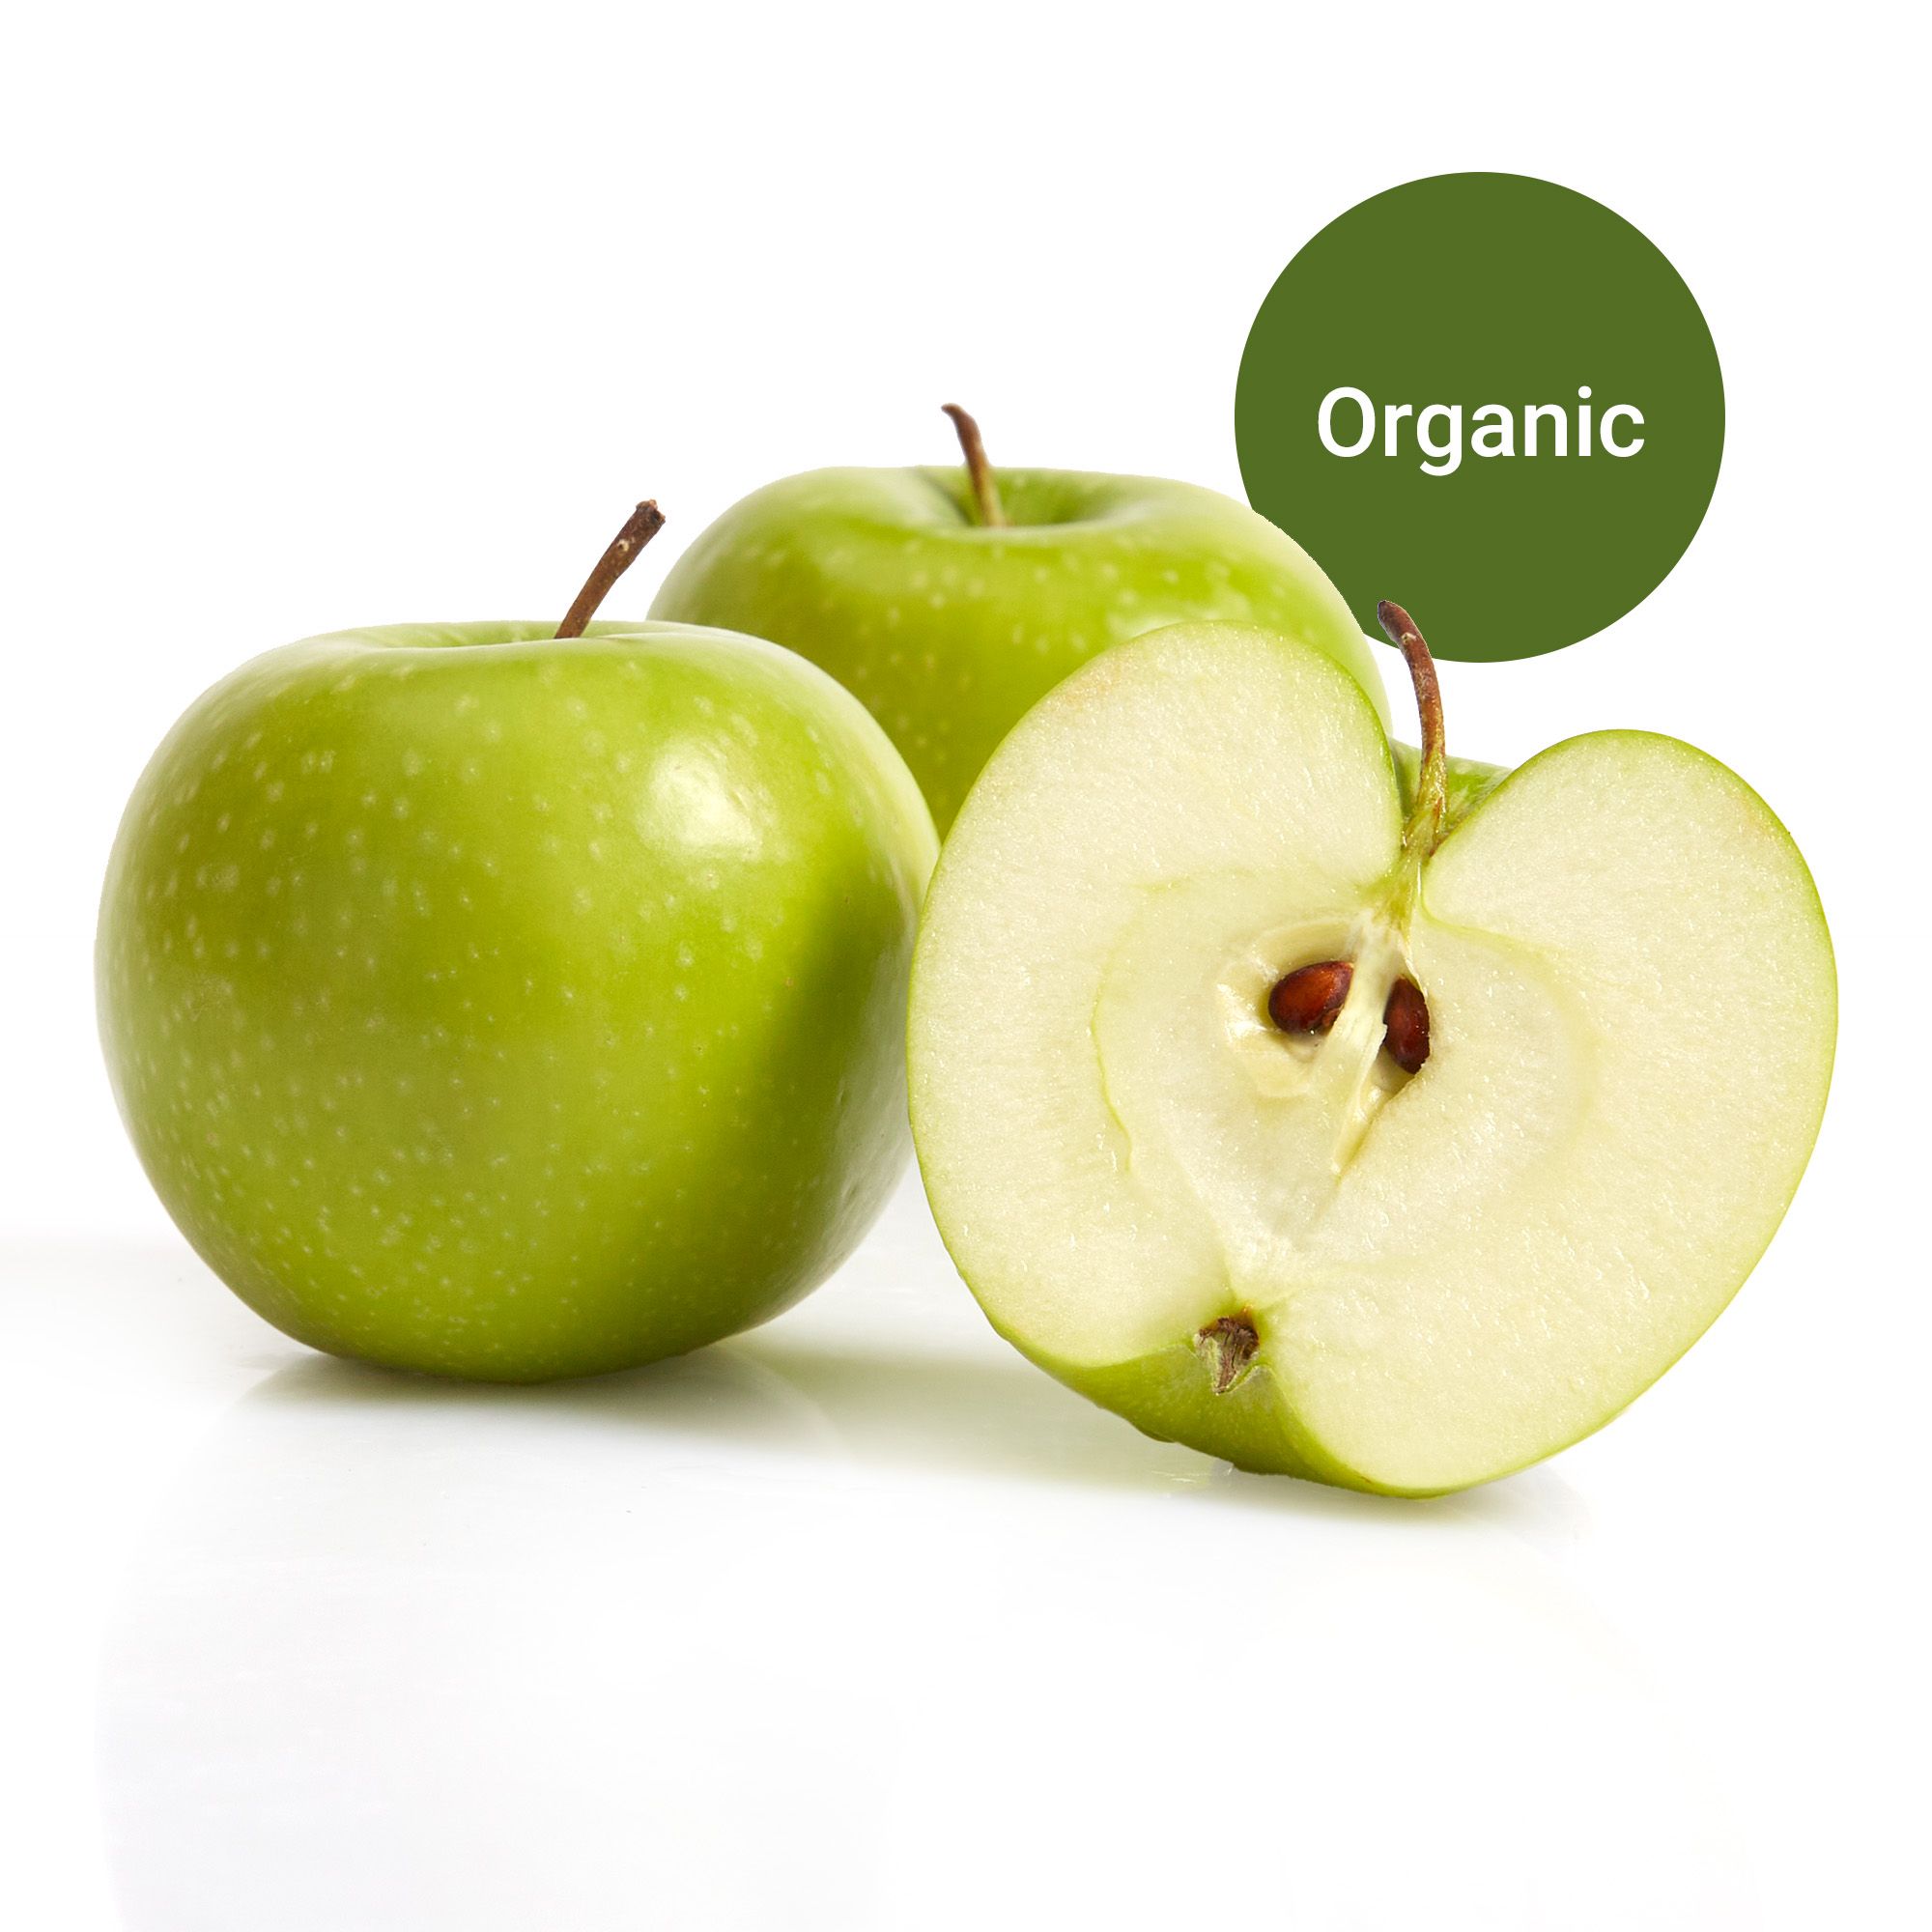 Organic Granny Smith Apples (3 Lb) at Whole Foods Market